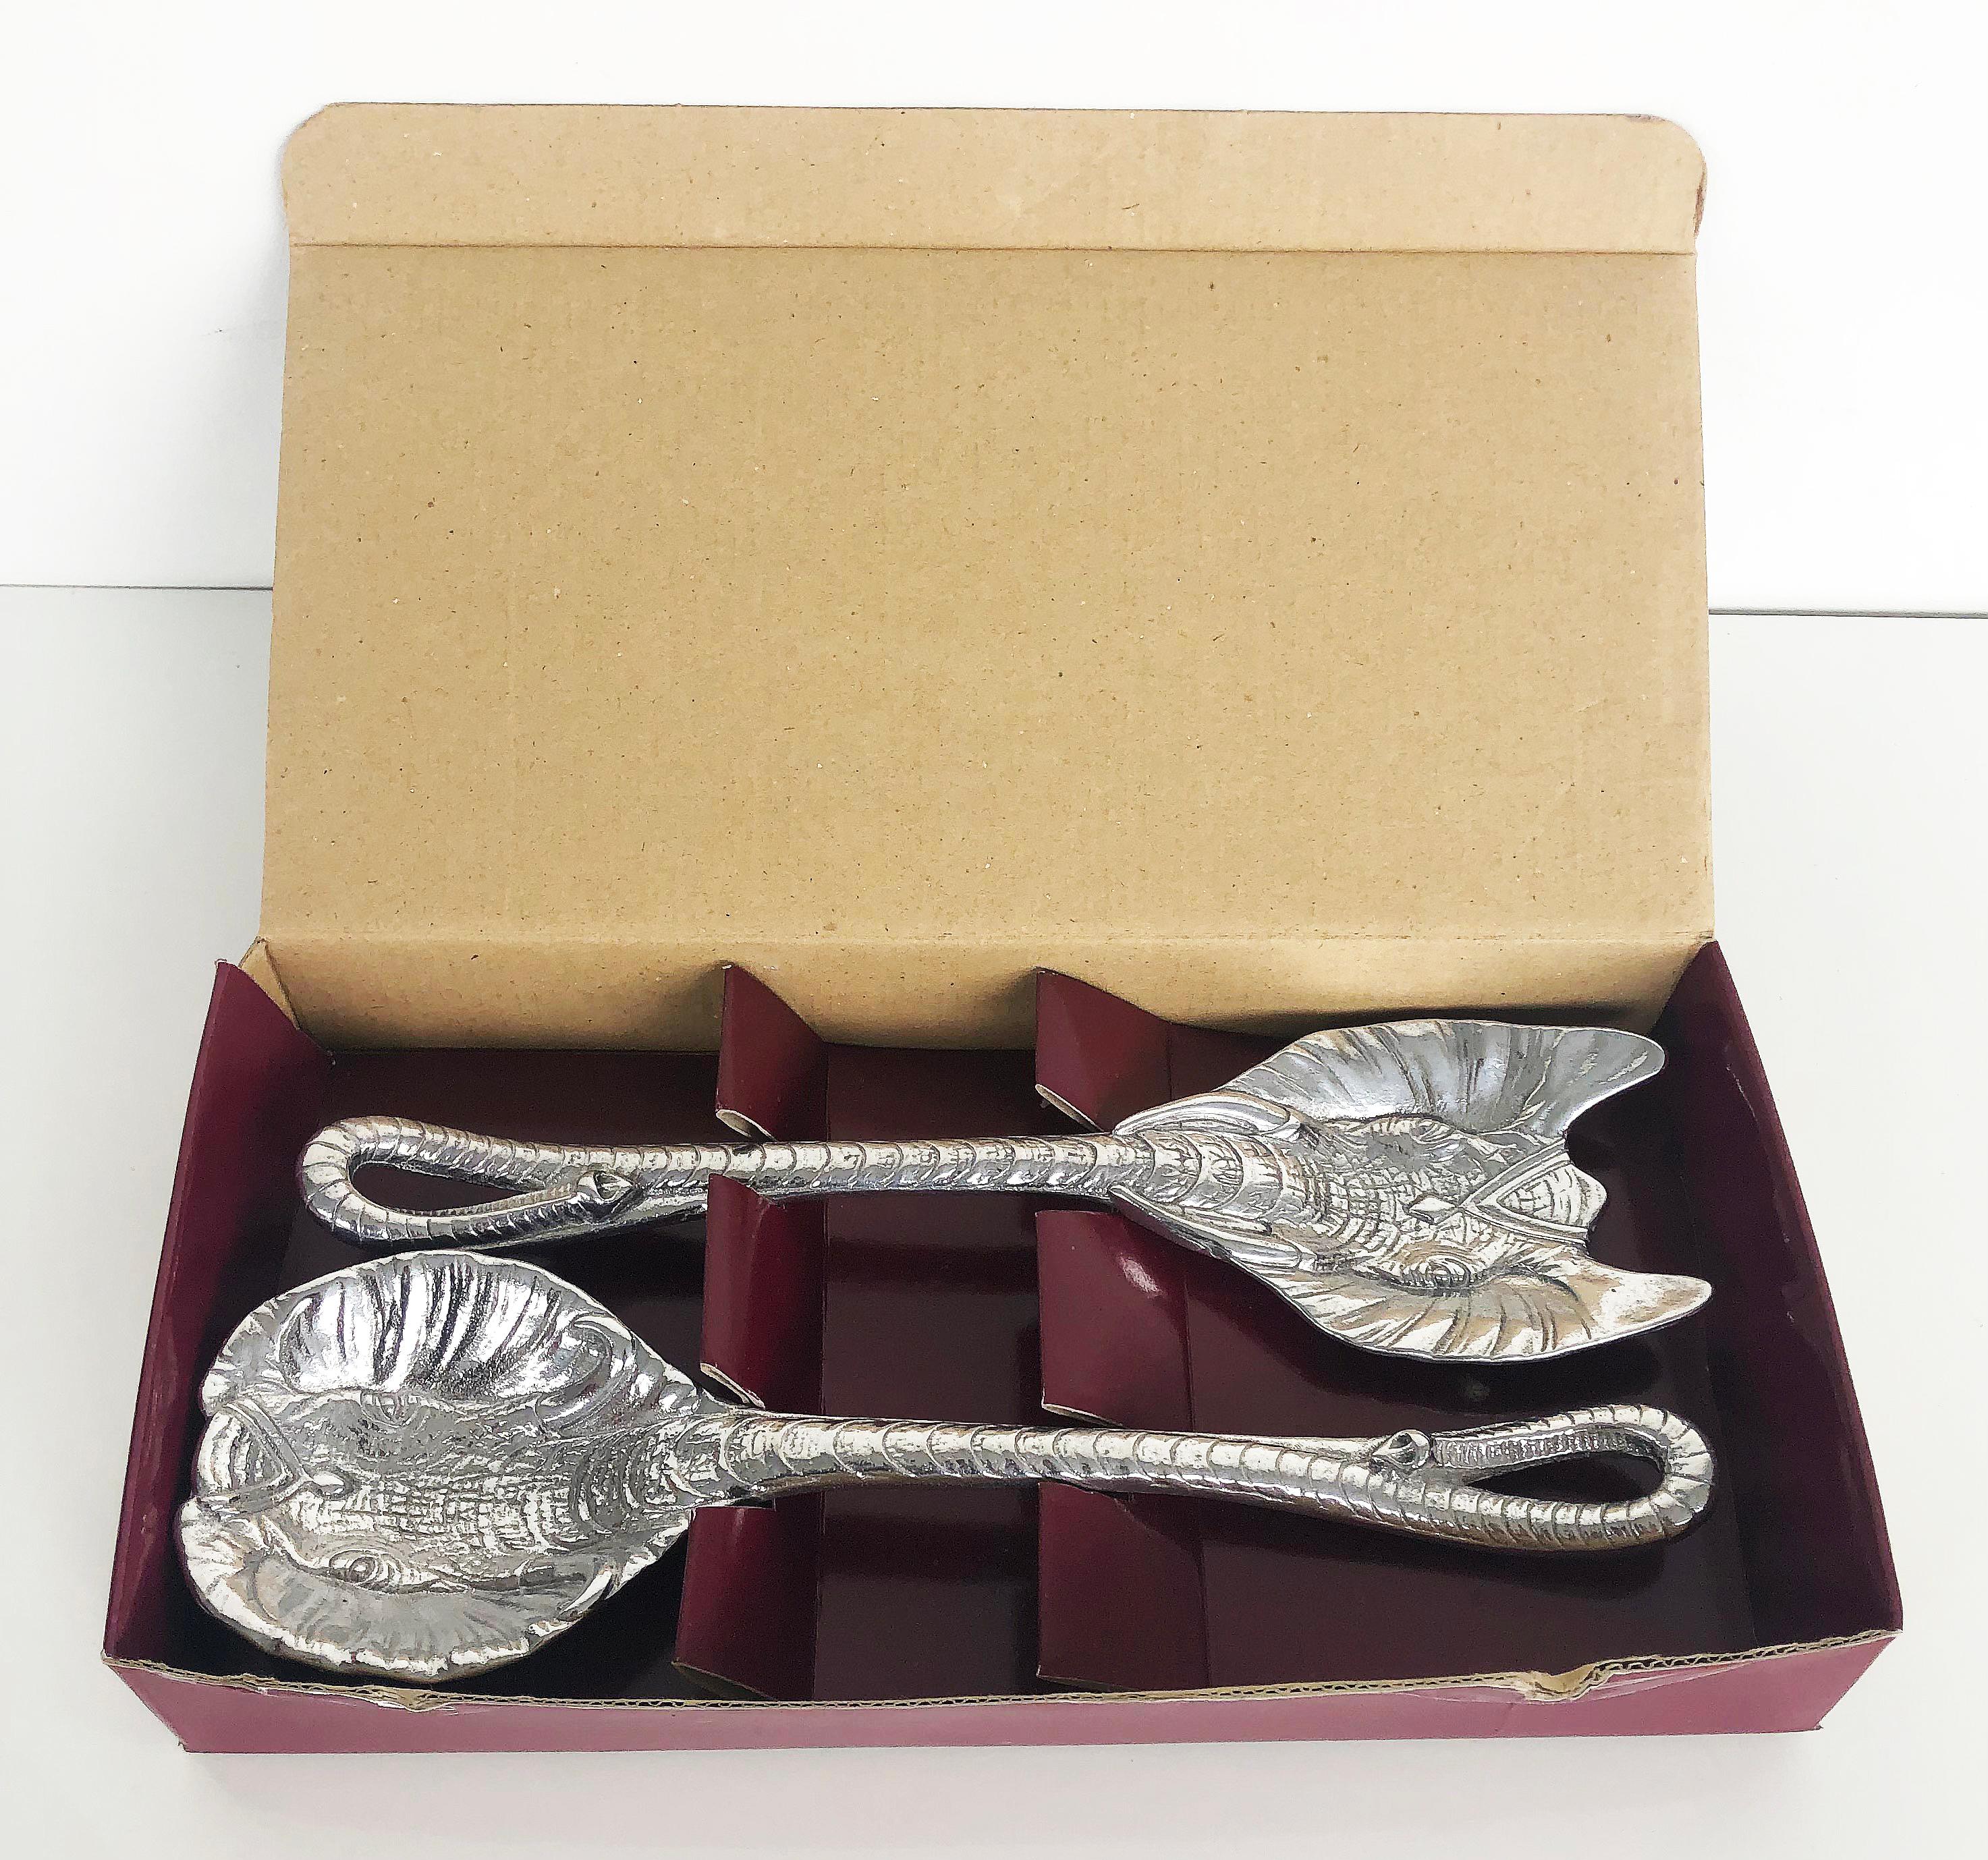 Arthur Court designs aluminum elephant salad servers, new in box

Offered is a vintage yet unused set of Arthur Court aluminum Elephant salad servers including a fork and spoon. The set includes the original box.